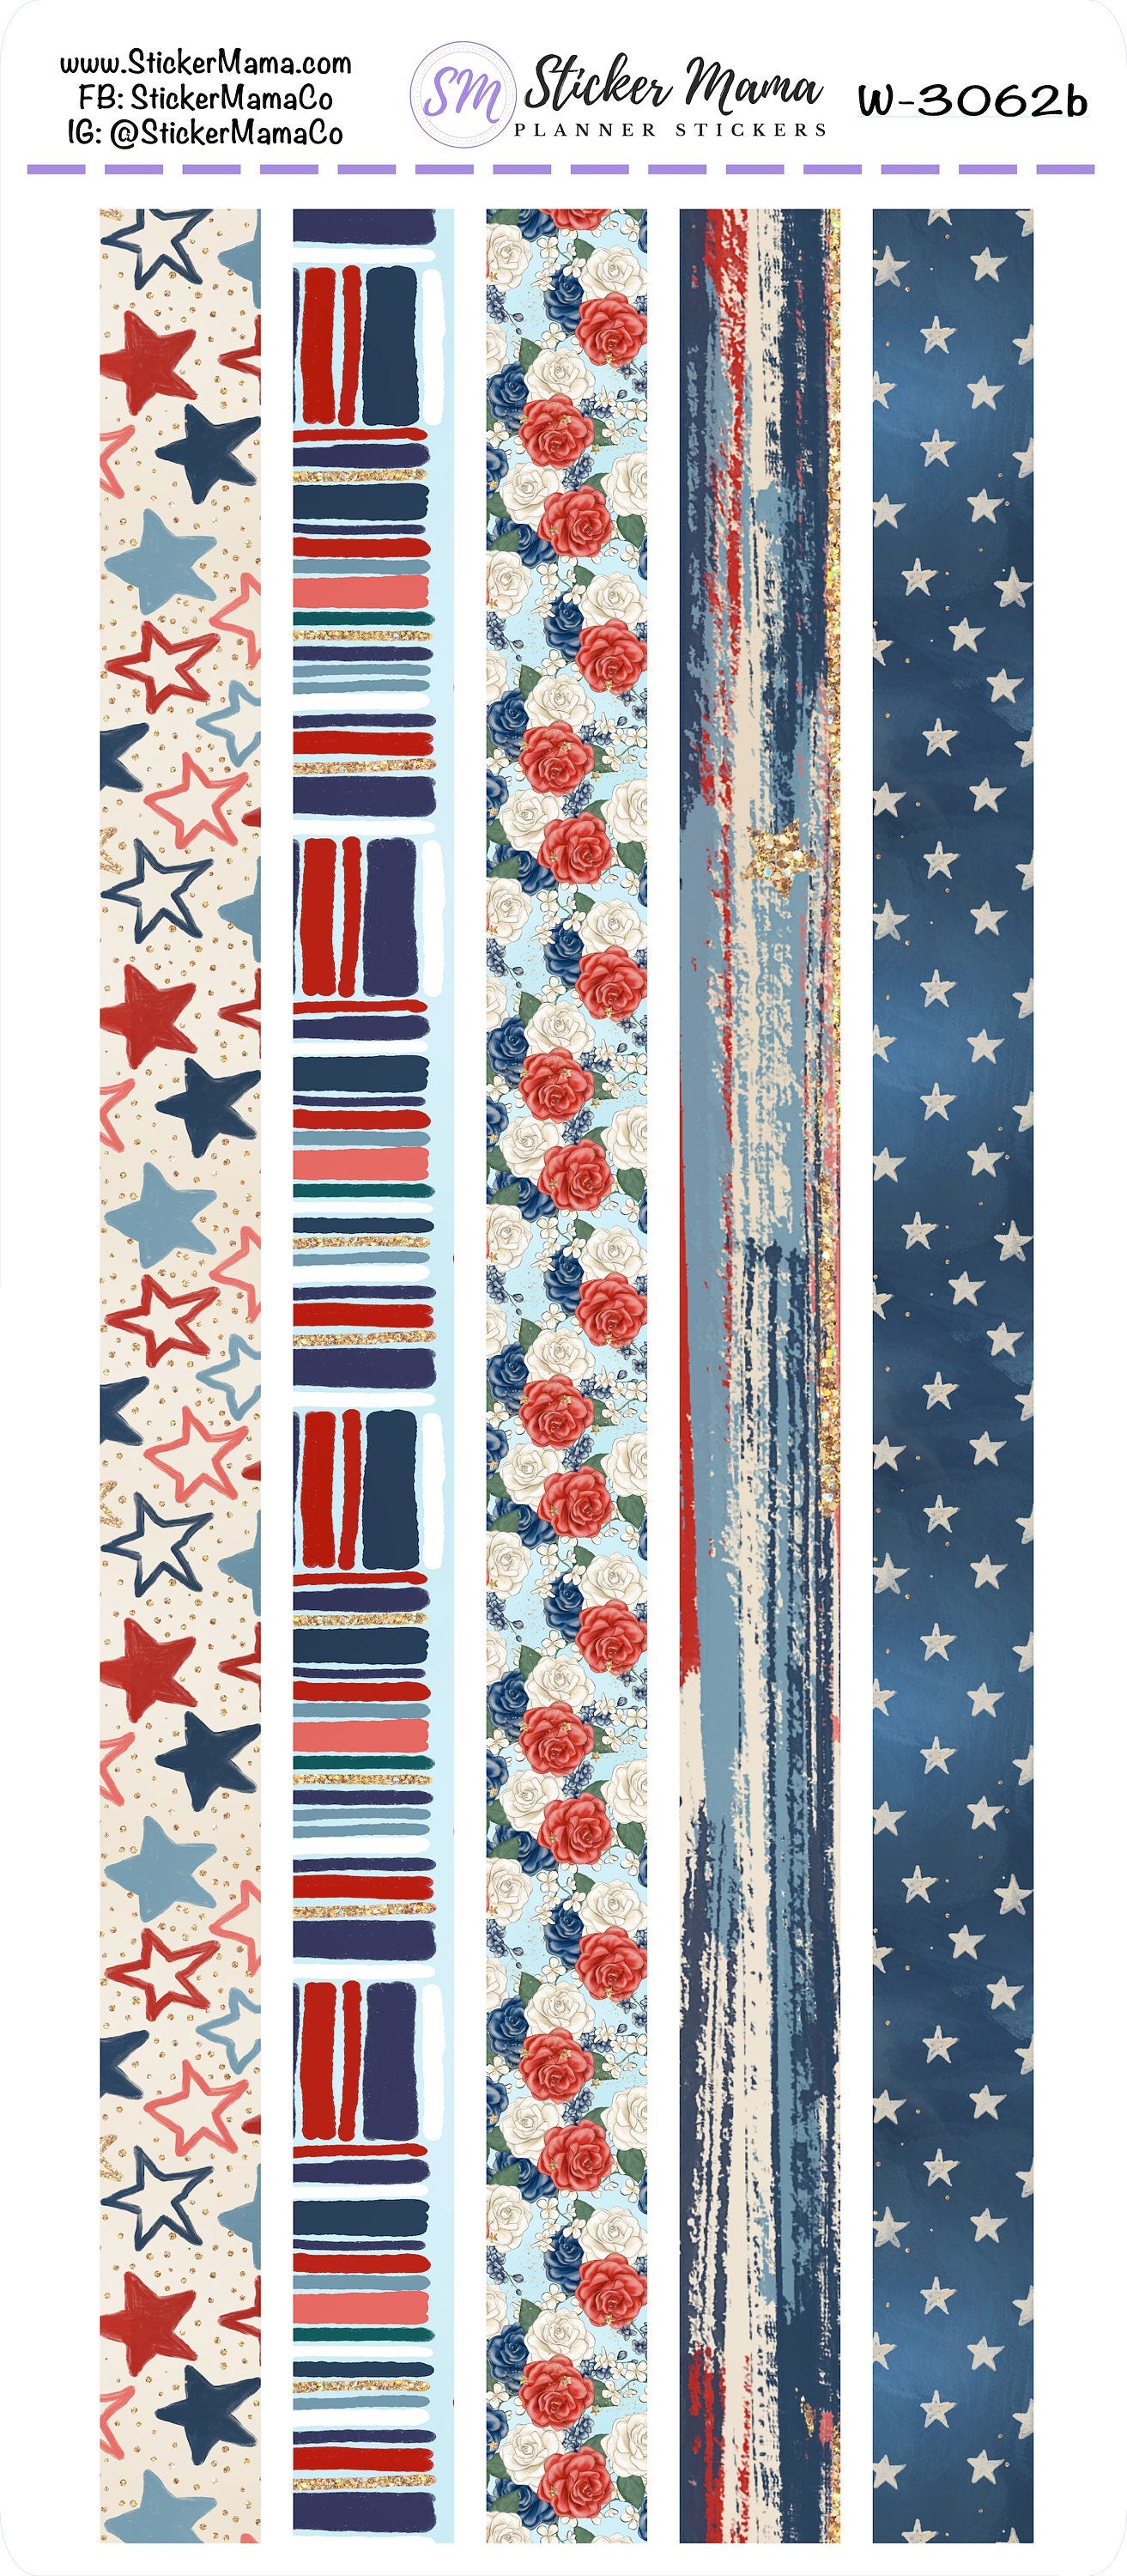 W-3062 - WASHI STICKERS - Patriotic - Planner Stickers - Washi for Planners